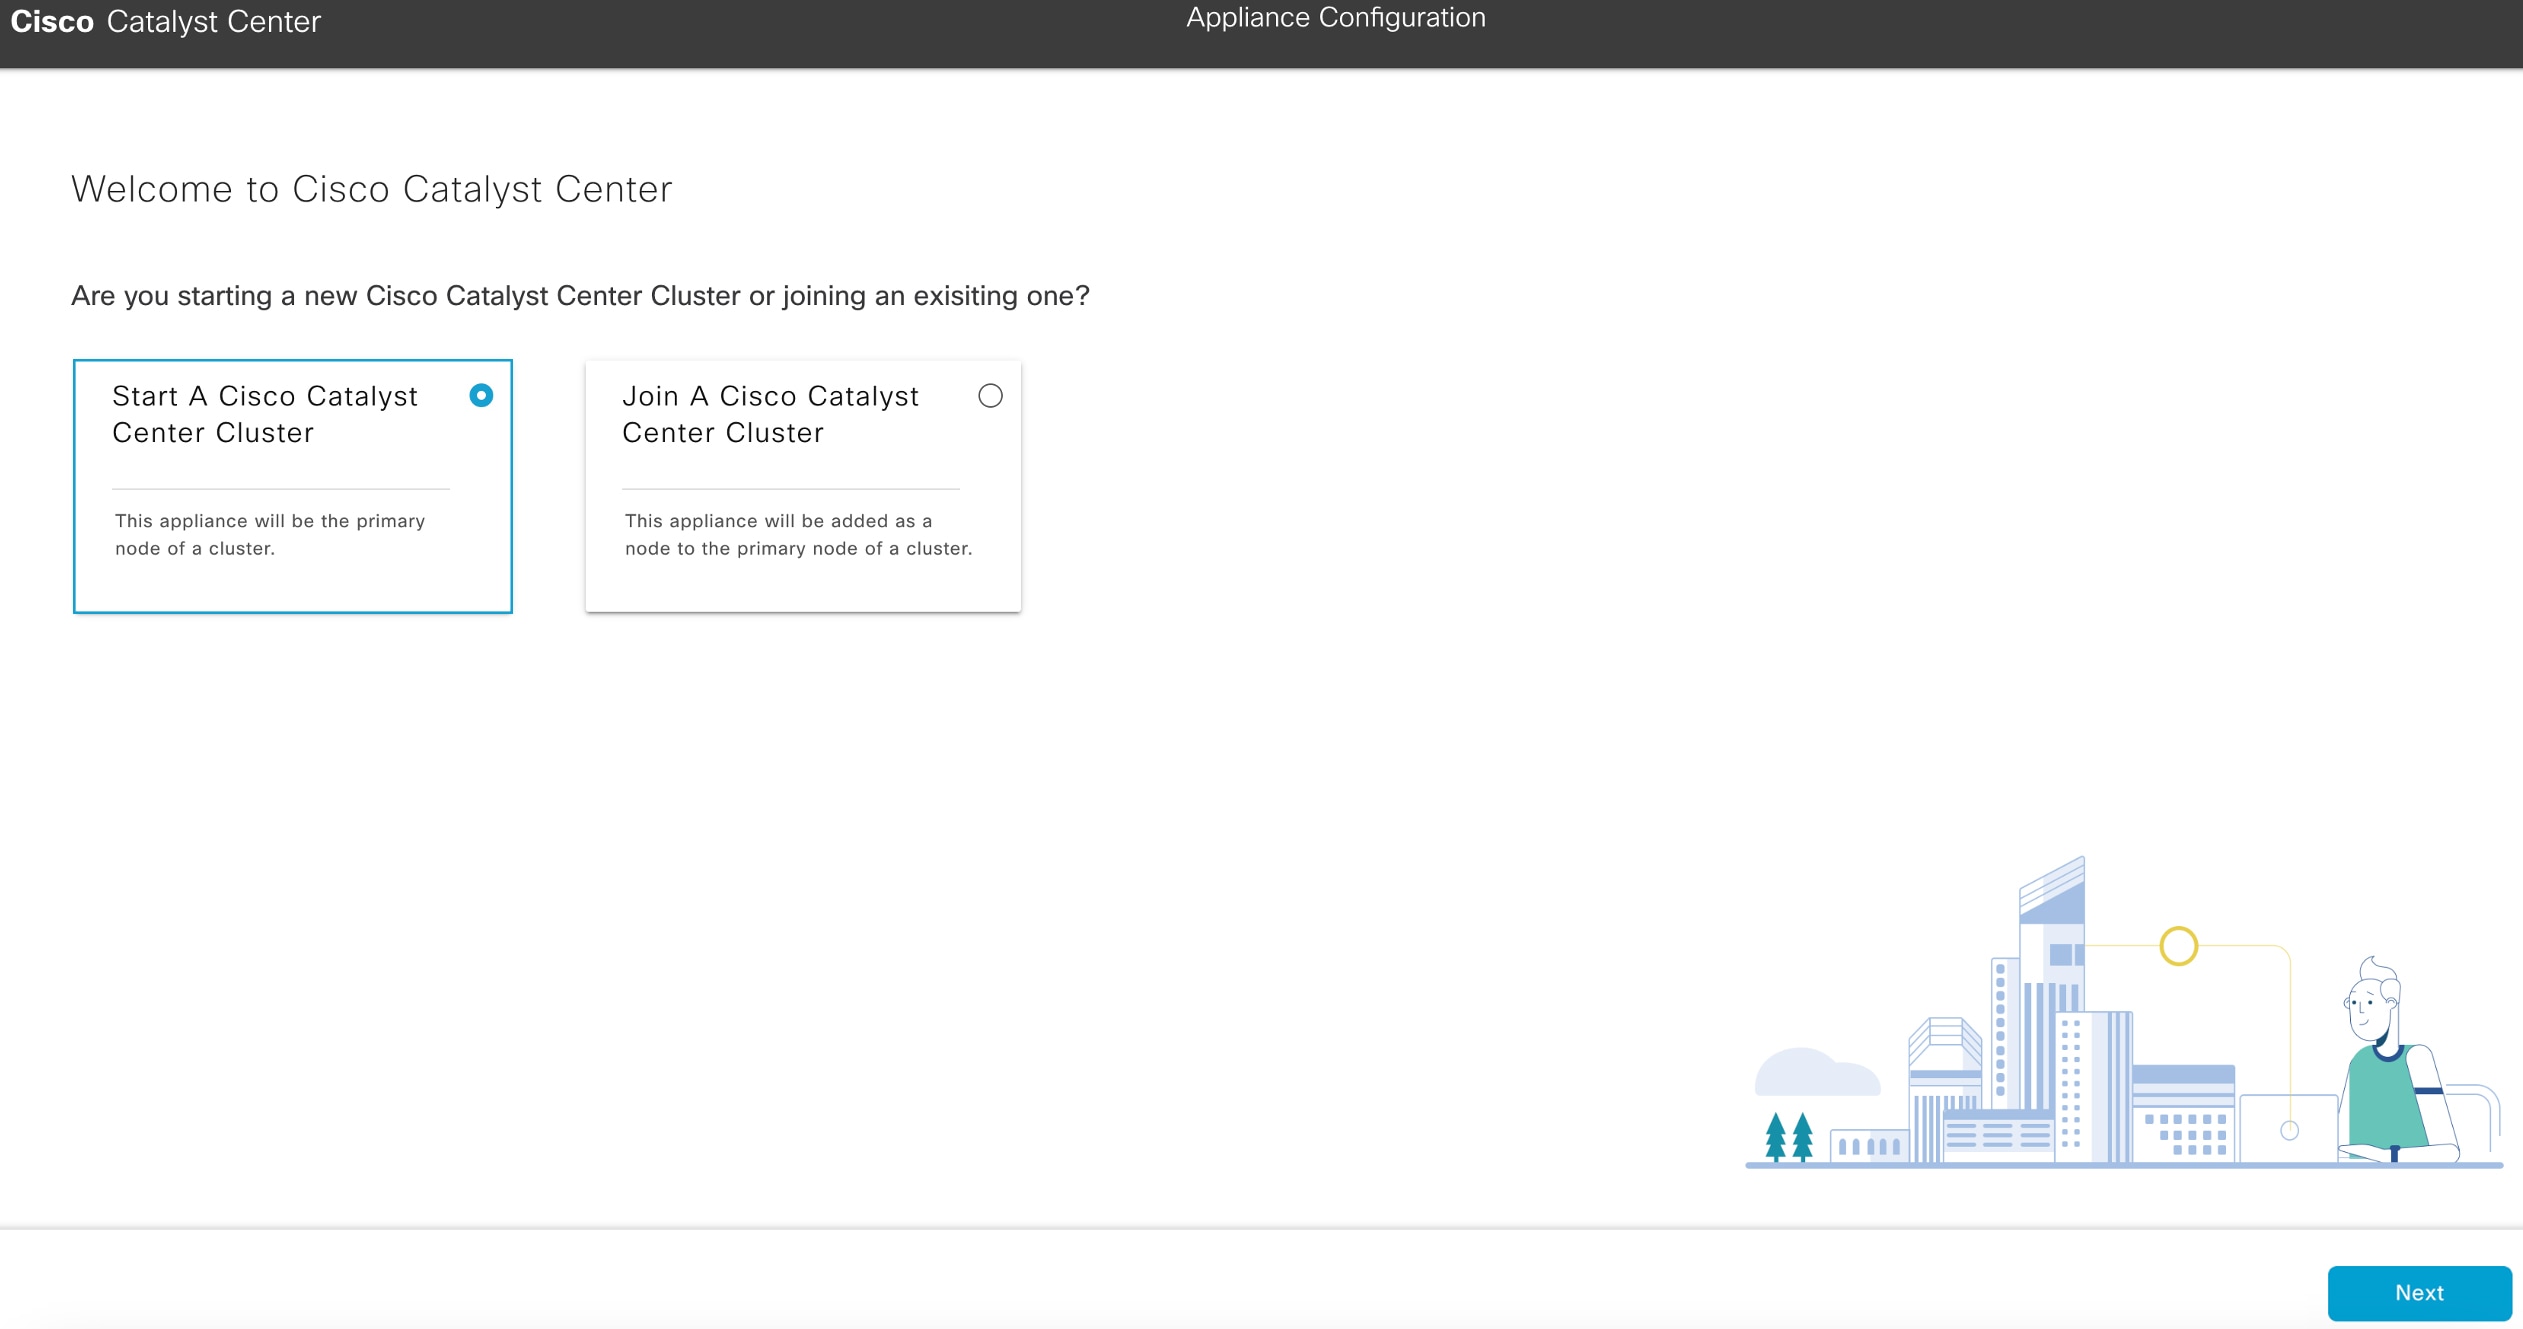 The Applicance Configuration screen displays two options: start or join a Cisco DNA Center cluster.